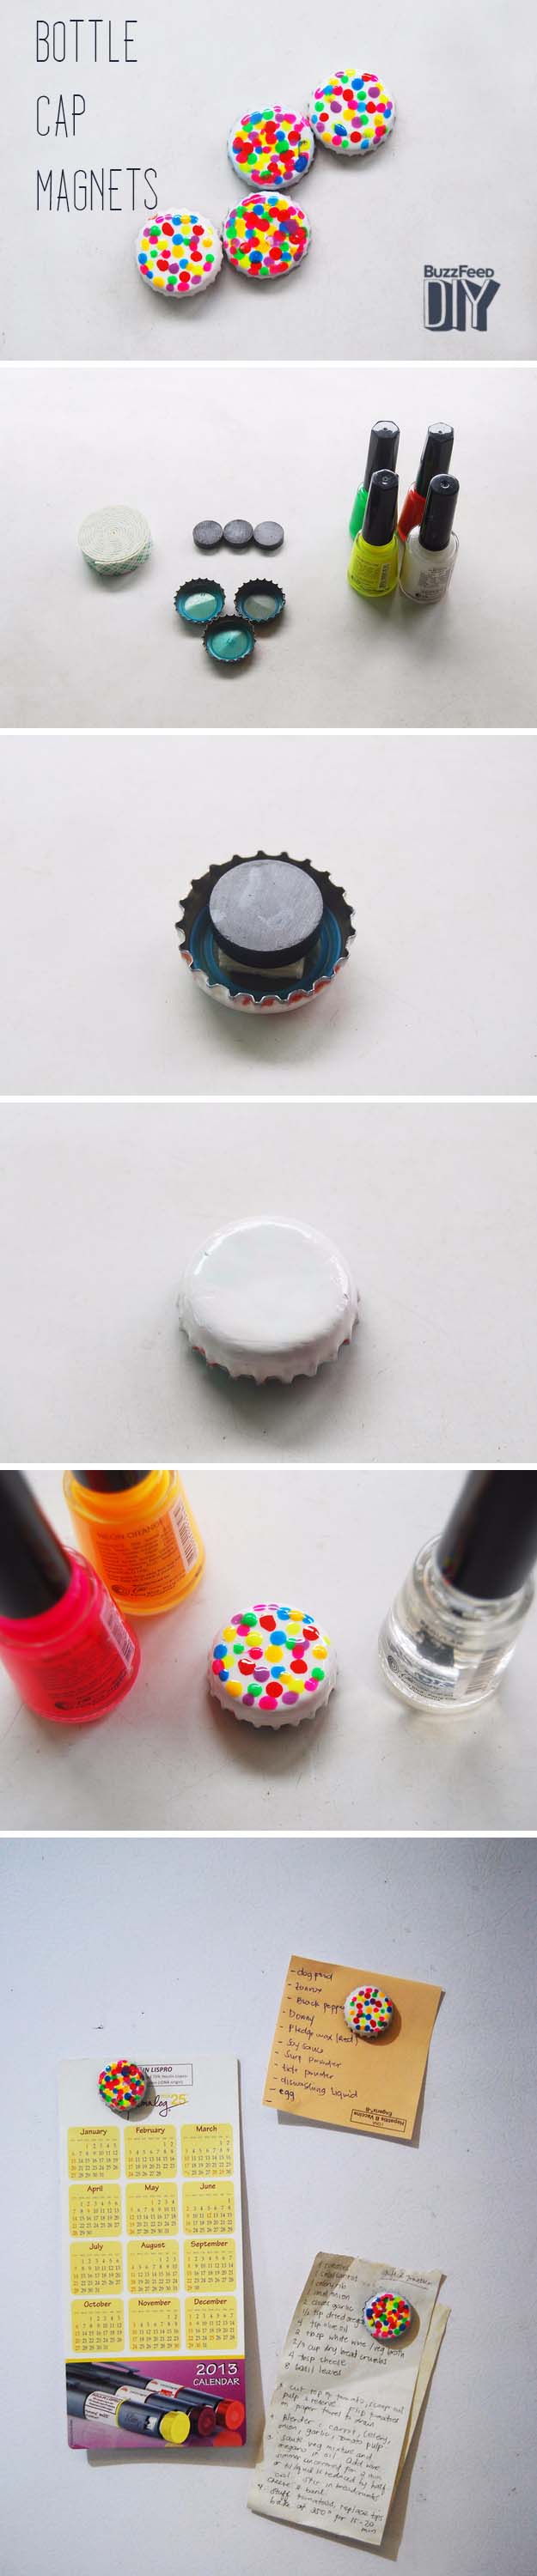 DIY Crafts Using Nail Polish - Fun, Cool, Easy and Cheap Craft Ideas for Girls, Teens, Tweens and Adults | DIY Bottle Cap Magnets